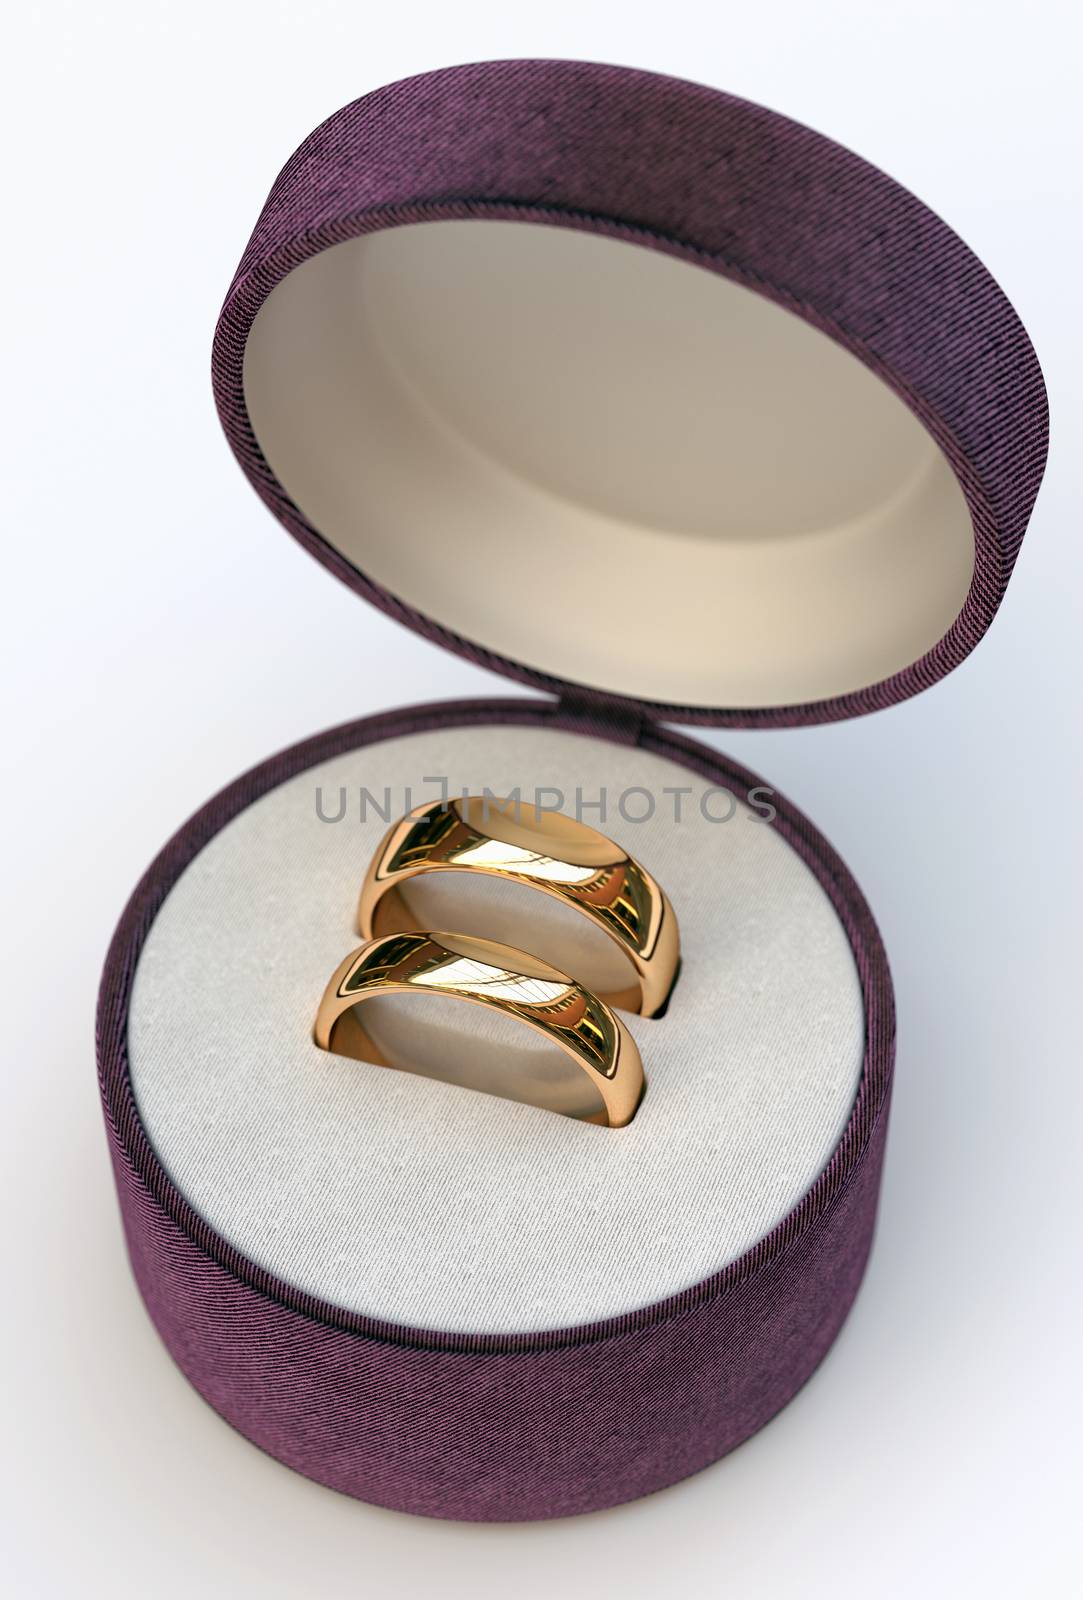 Couple of gold wedding rings  in jewelry purple box  by Barbraford